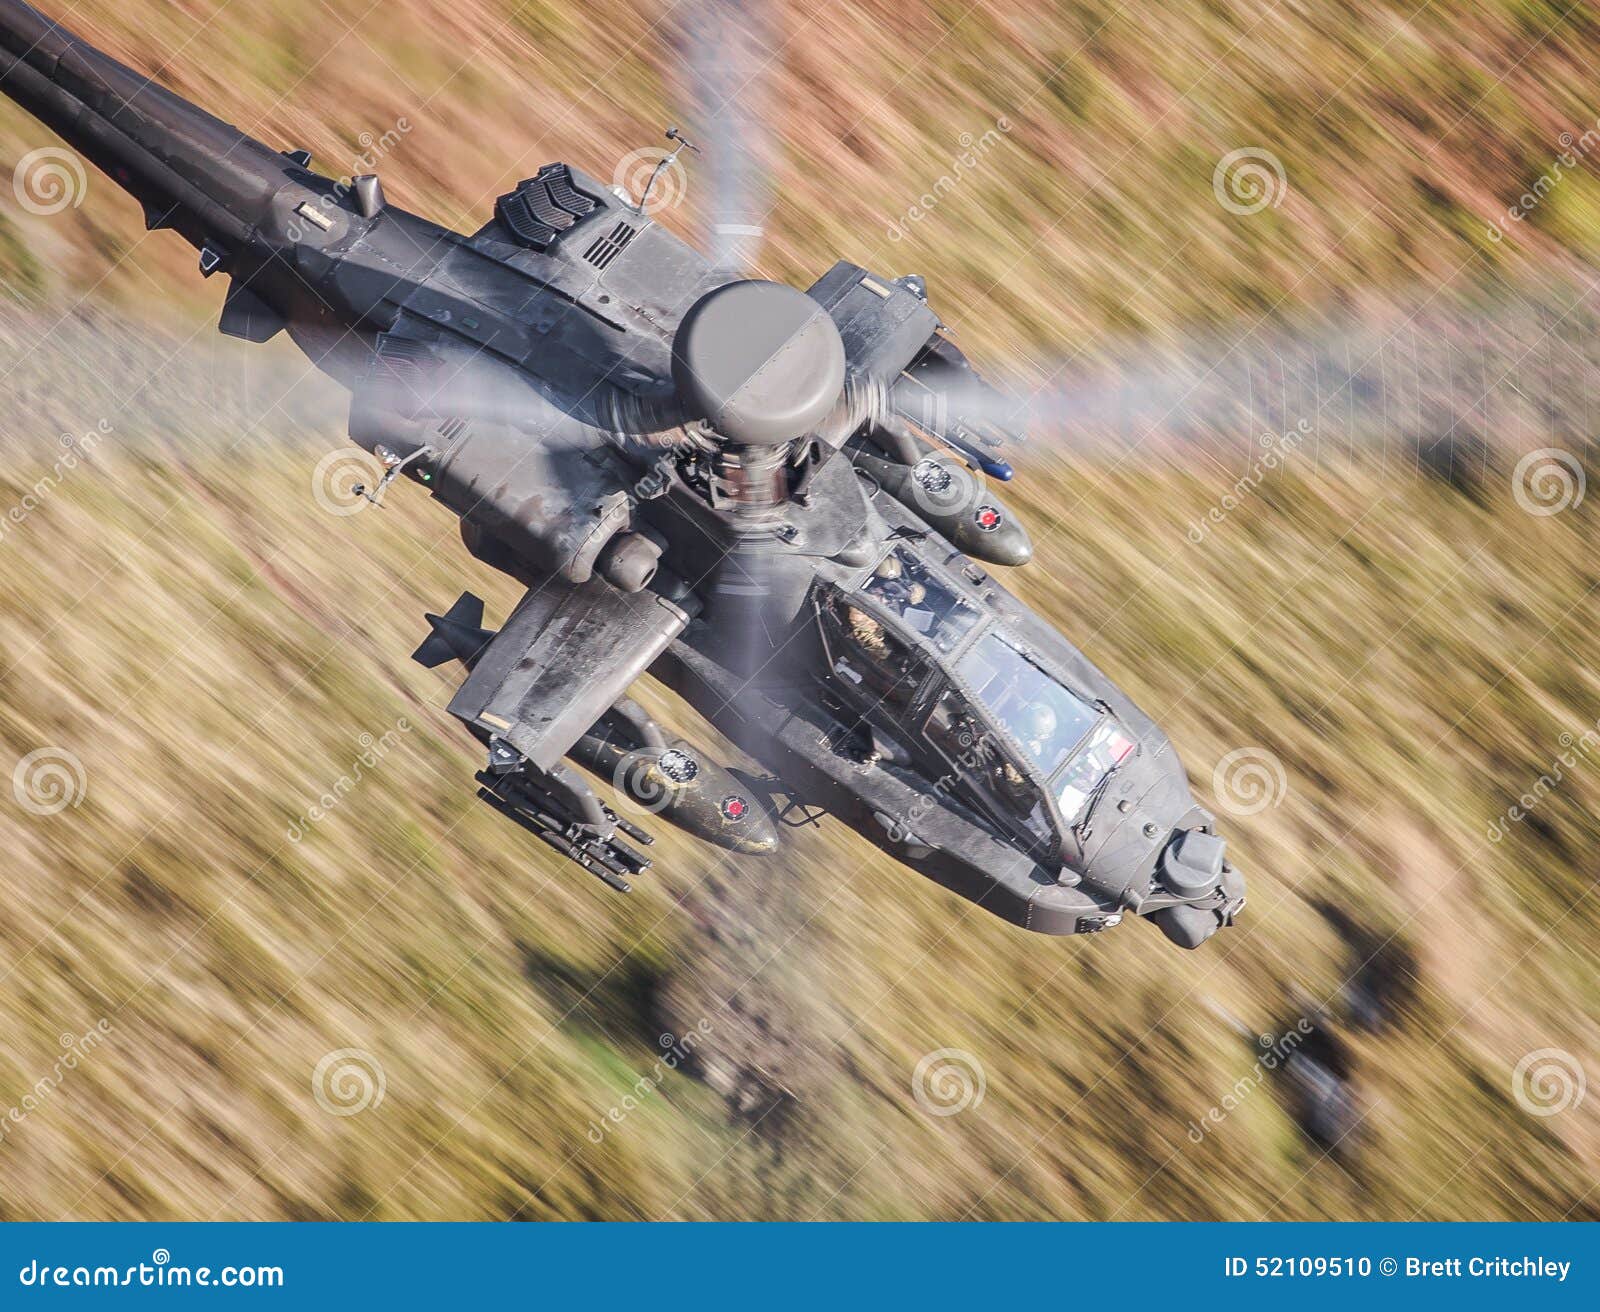 apache helicopter flying